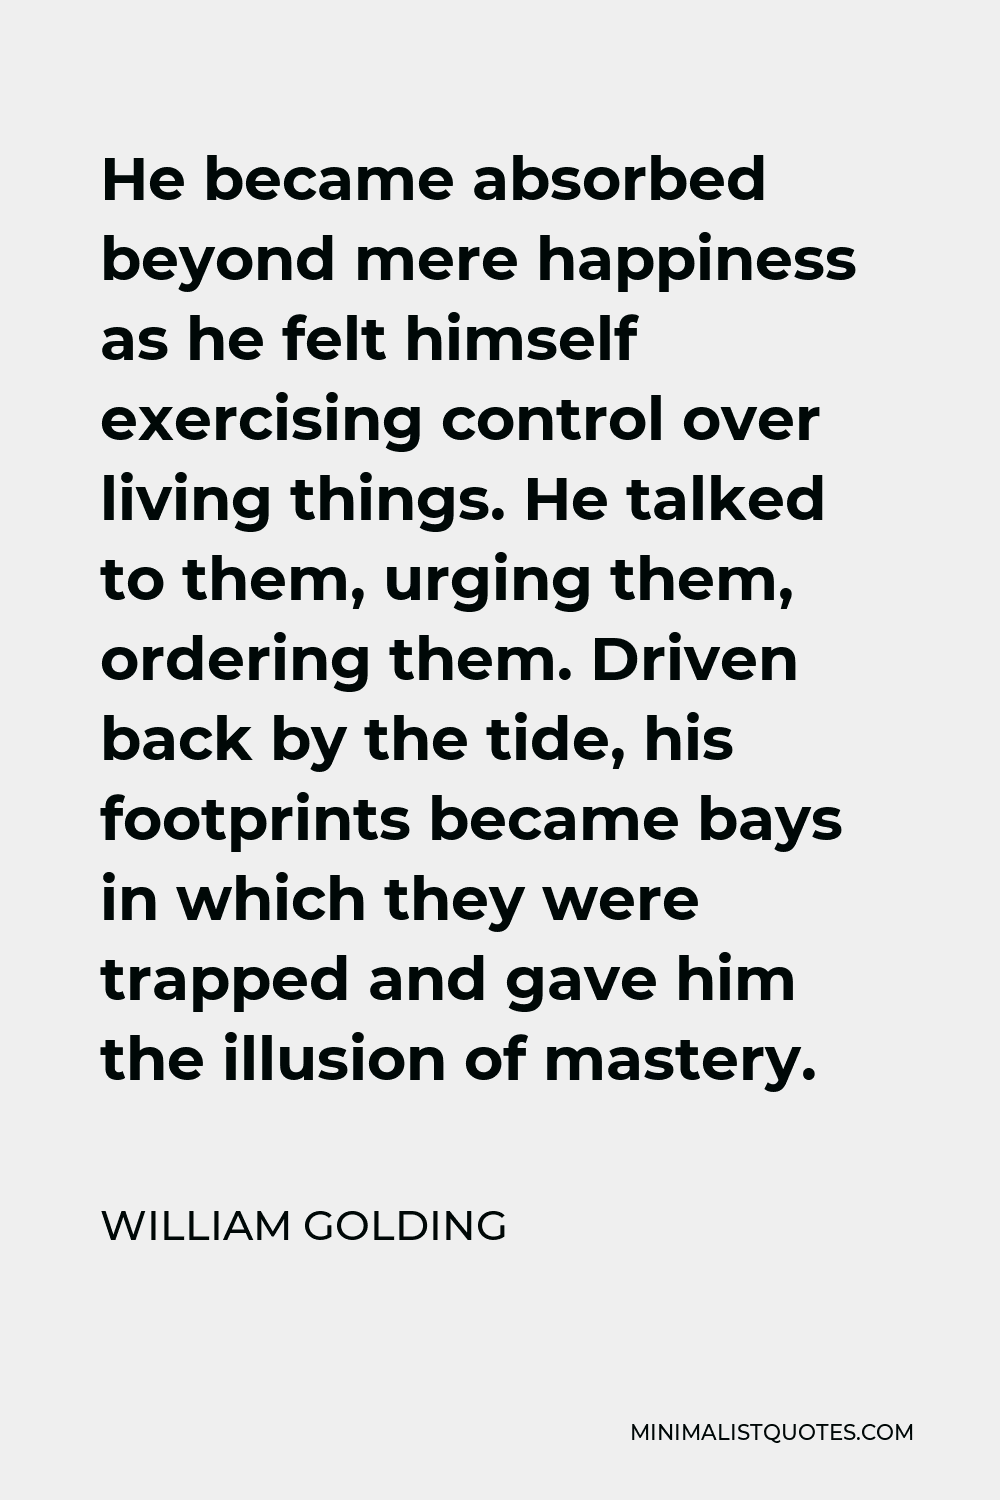 William Golding Quote - He became absorbed beyond mere happiness as he felt himself exercising control over living things. He talked to them, urging them, ordering them. Driven back by the tide, his footprints became bays in which they were trapped and gave him the illusion of mastery.